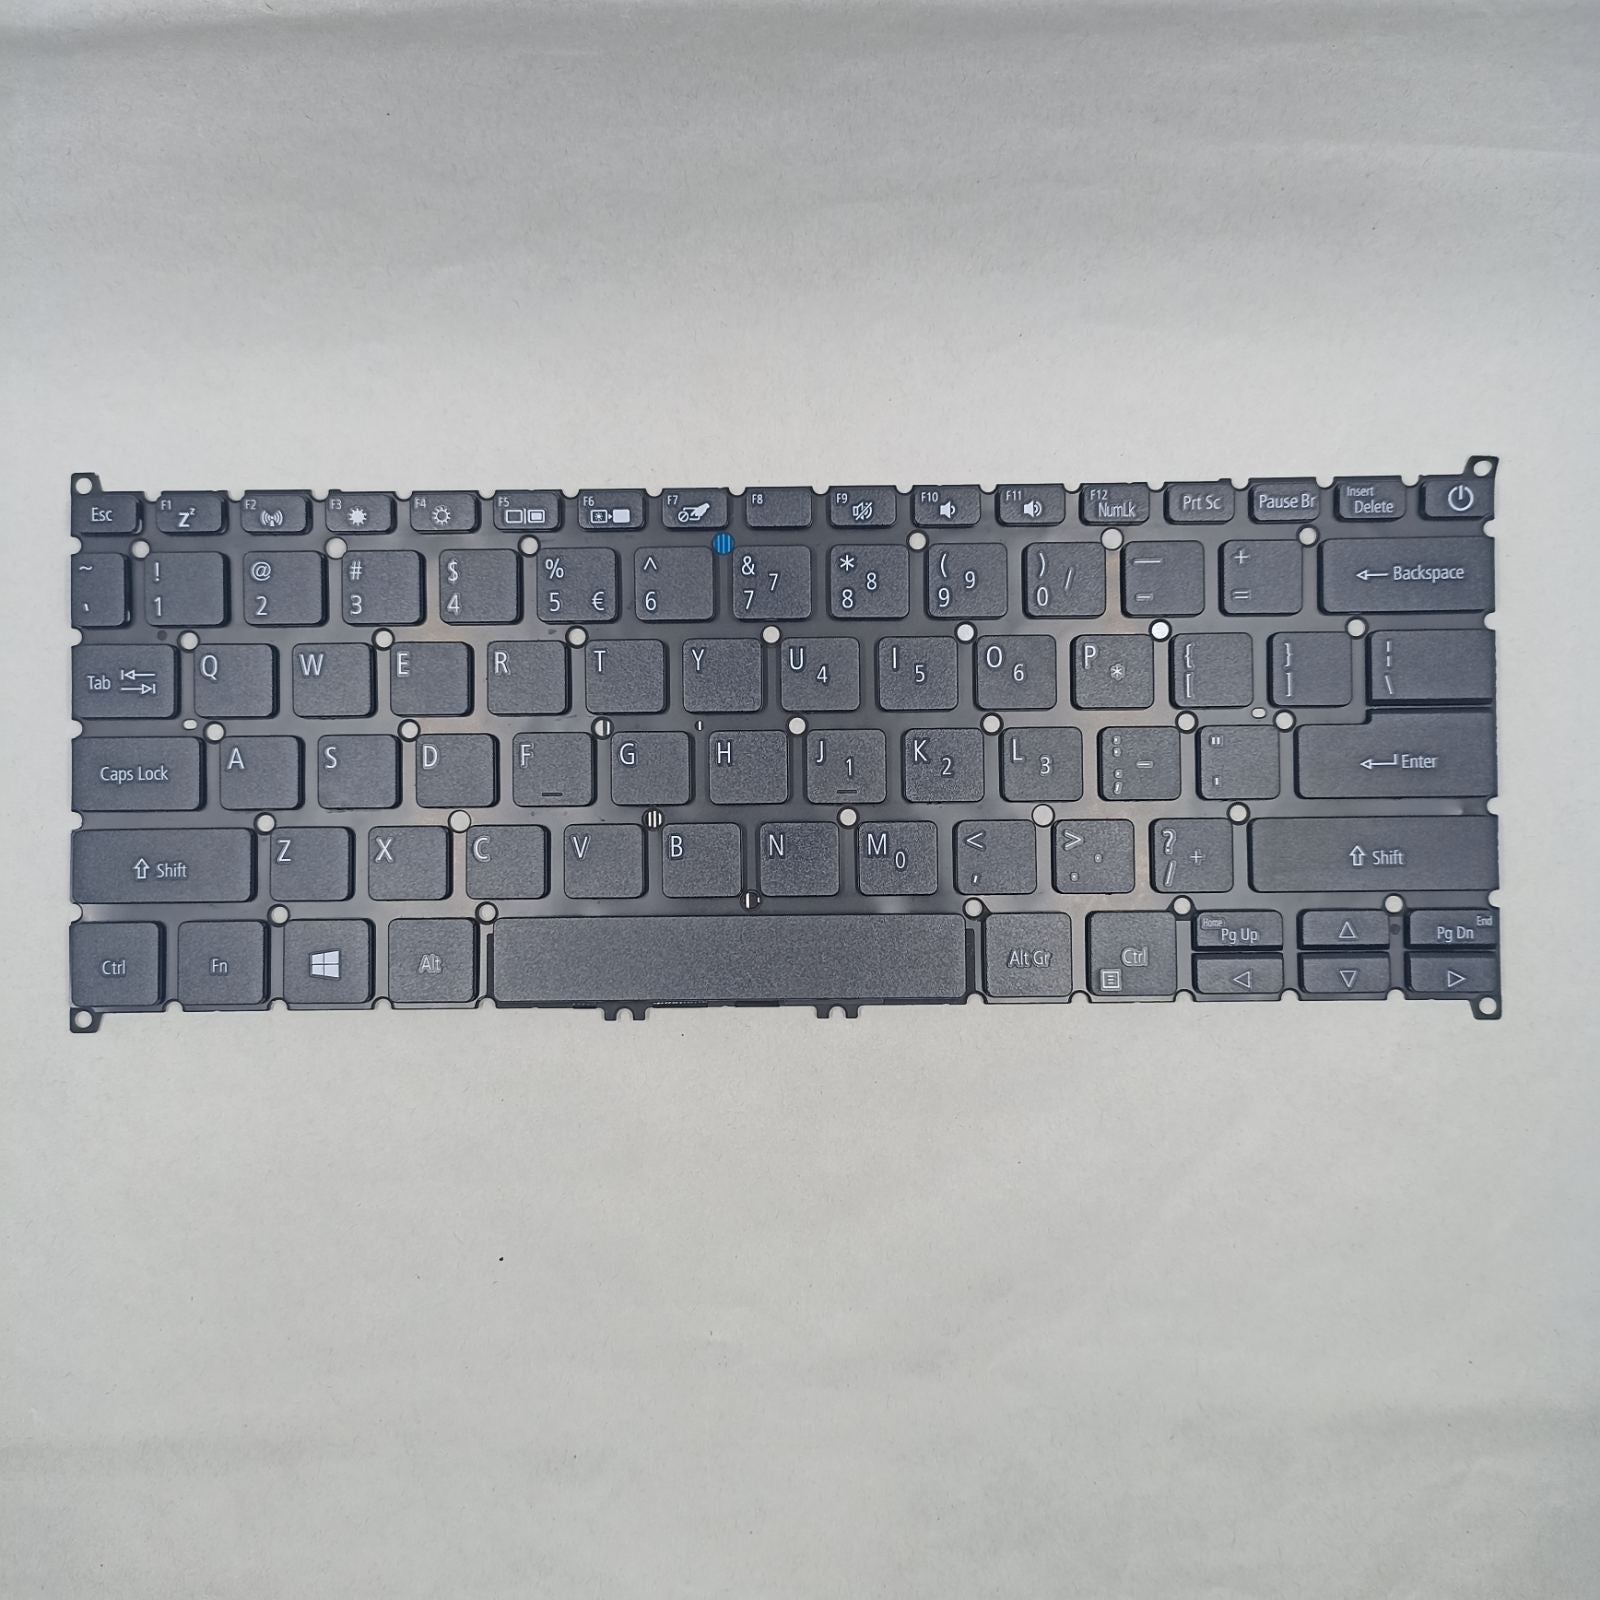 Replacement Keyboard Keys for Acer CP713-1WN A1